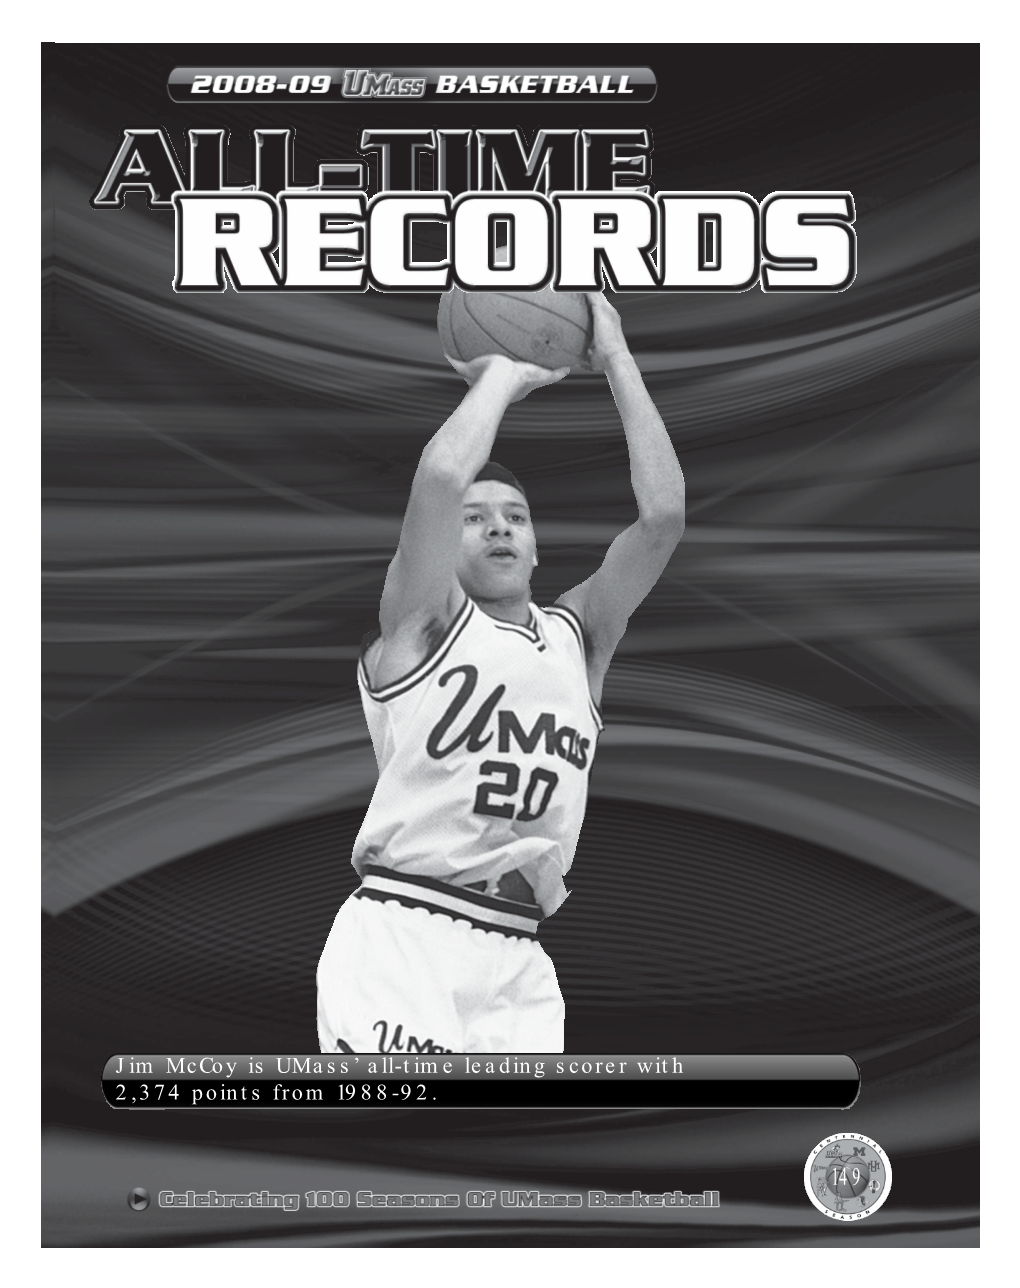 Jim Mccoy Is Umass' All-Time Leading Scorer with 2,374 Points from 1988